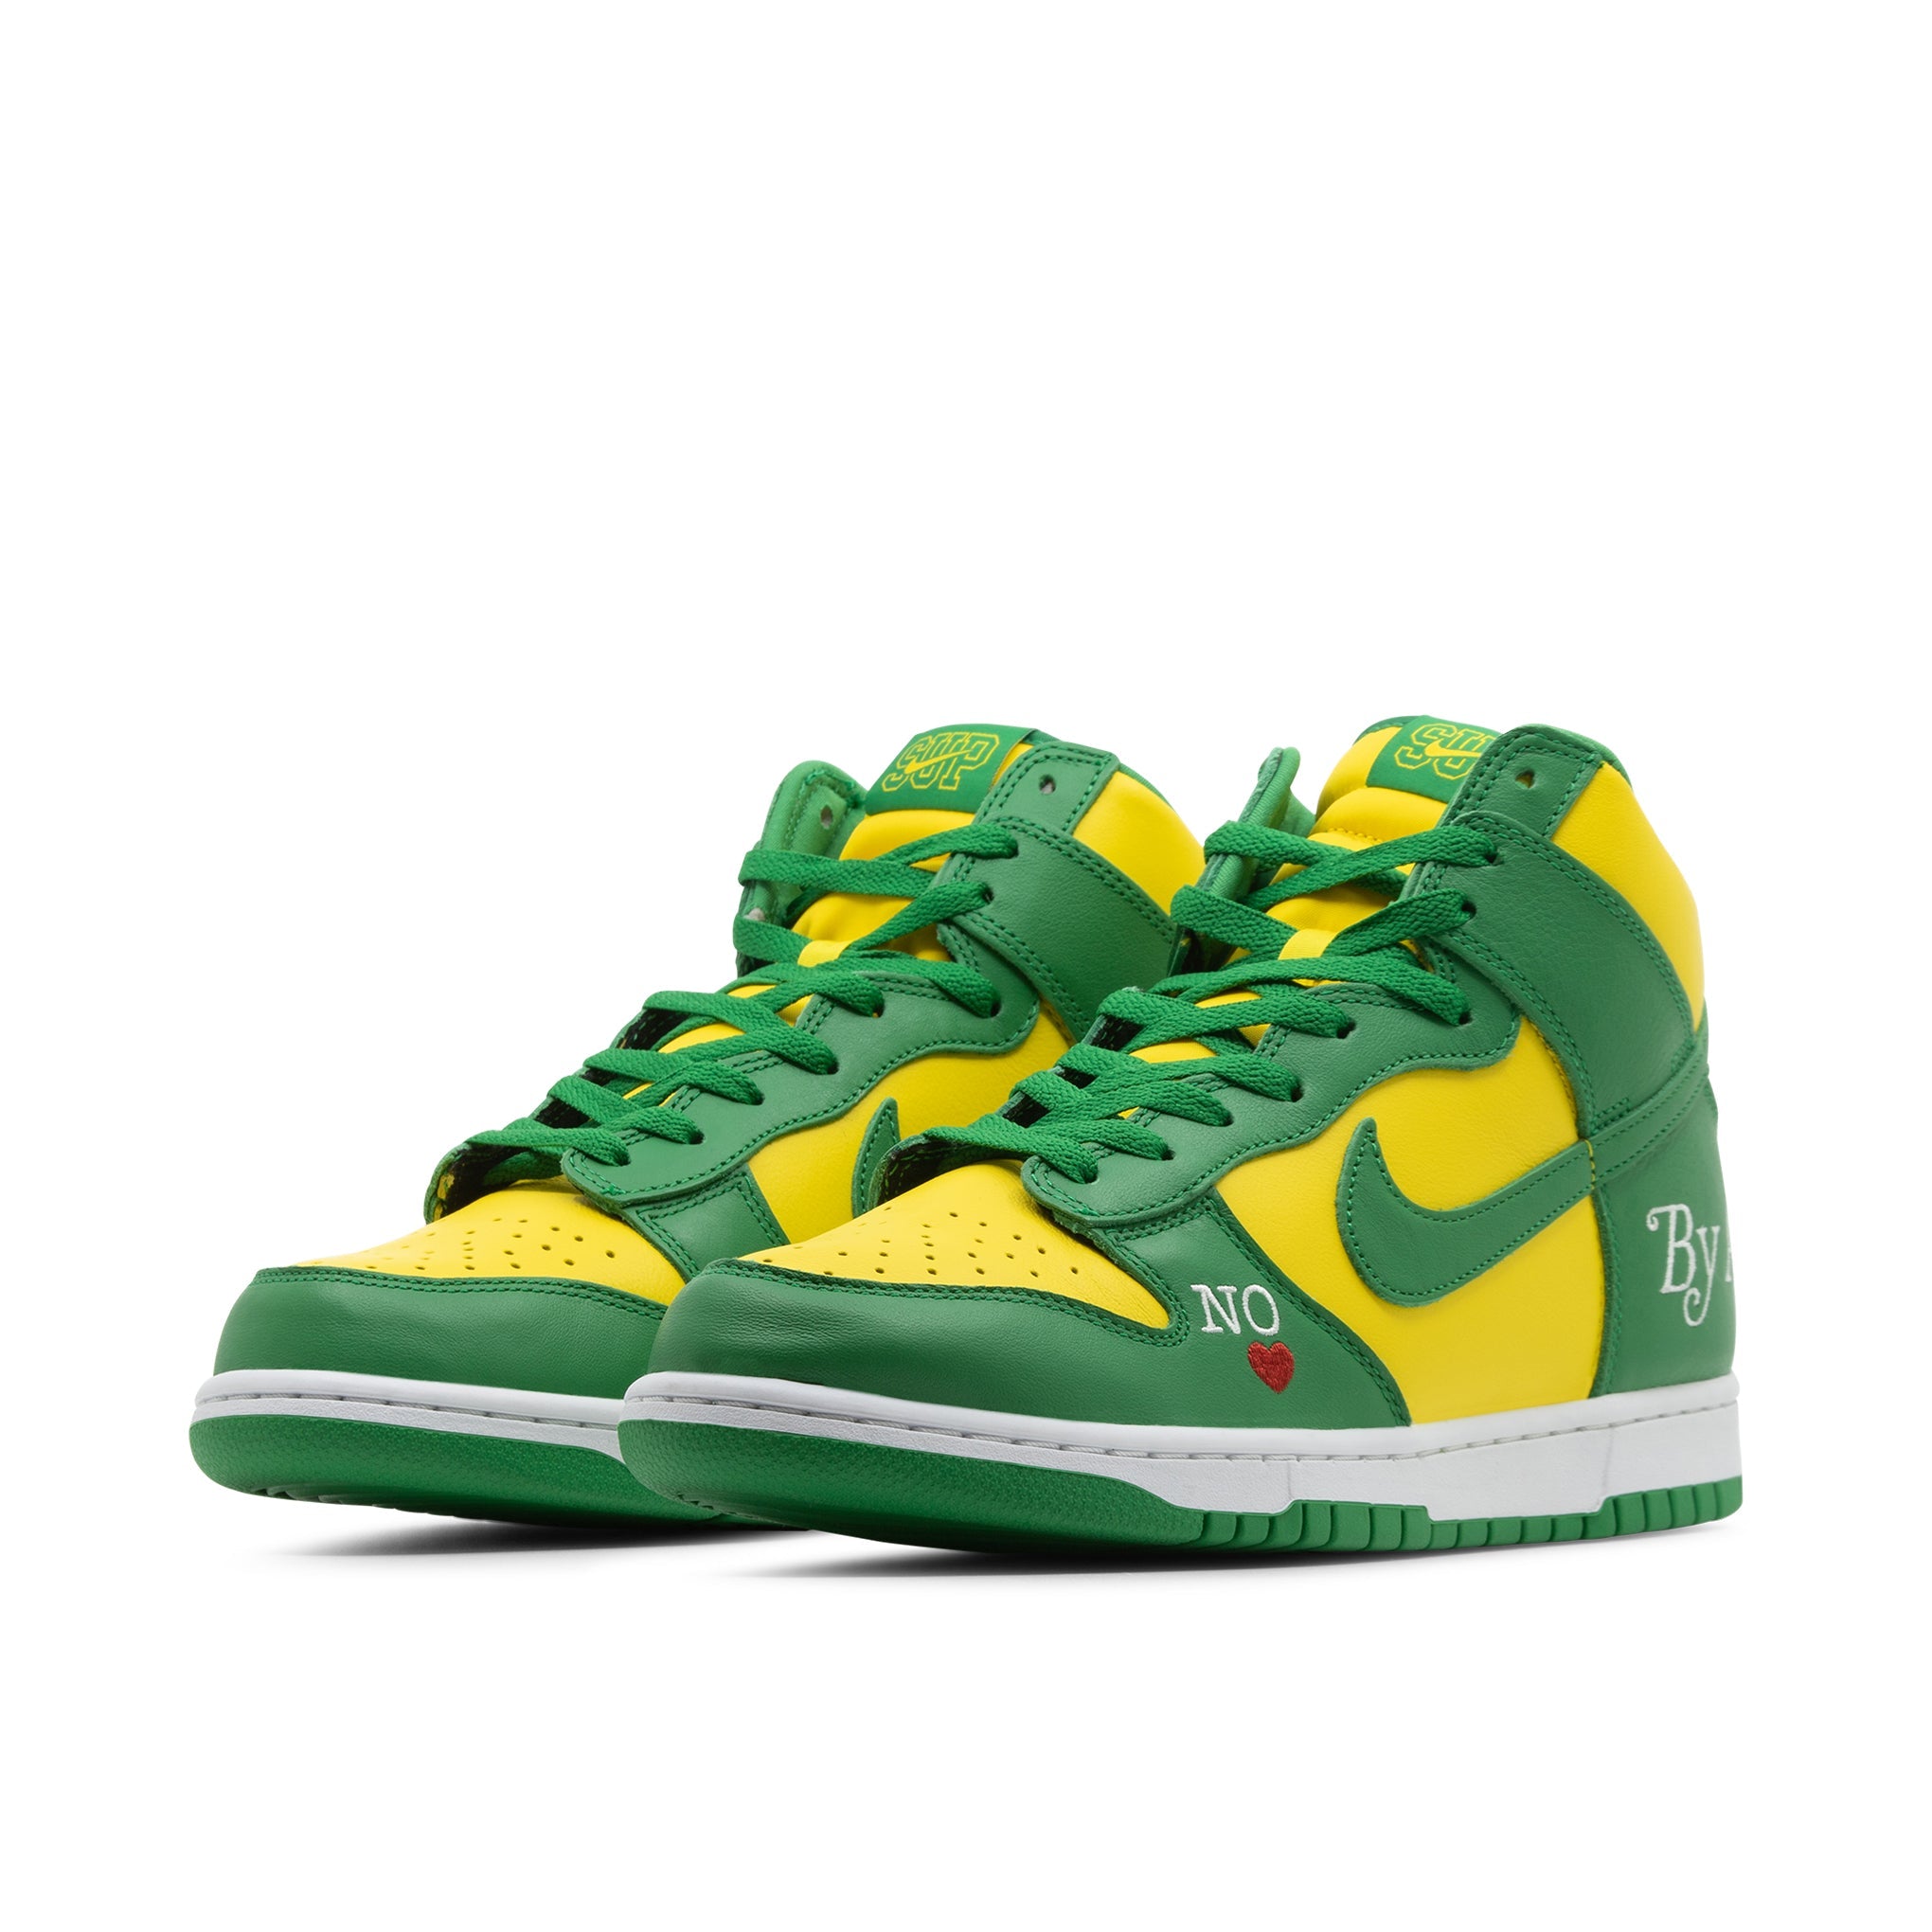 NIKE SB DUNK HIGH SUPREME BY ANY MEANS BRAZIL